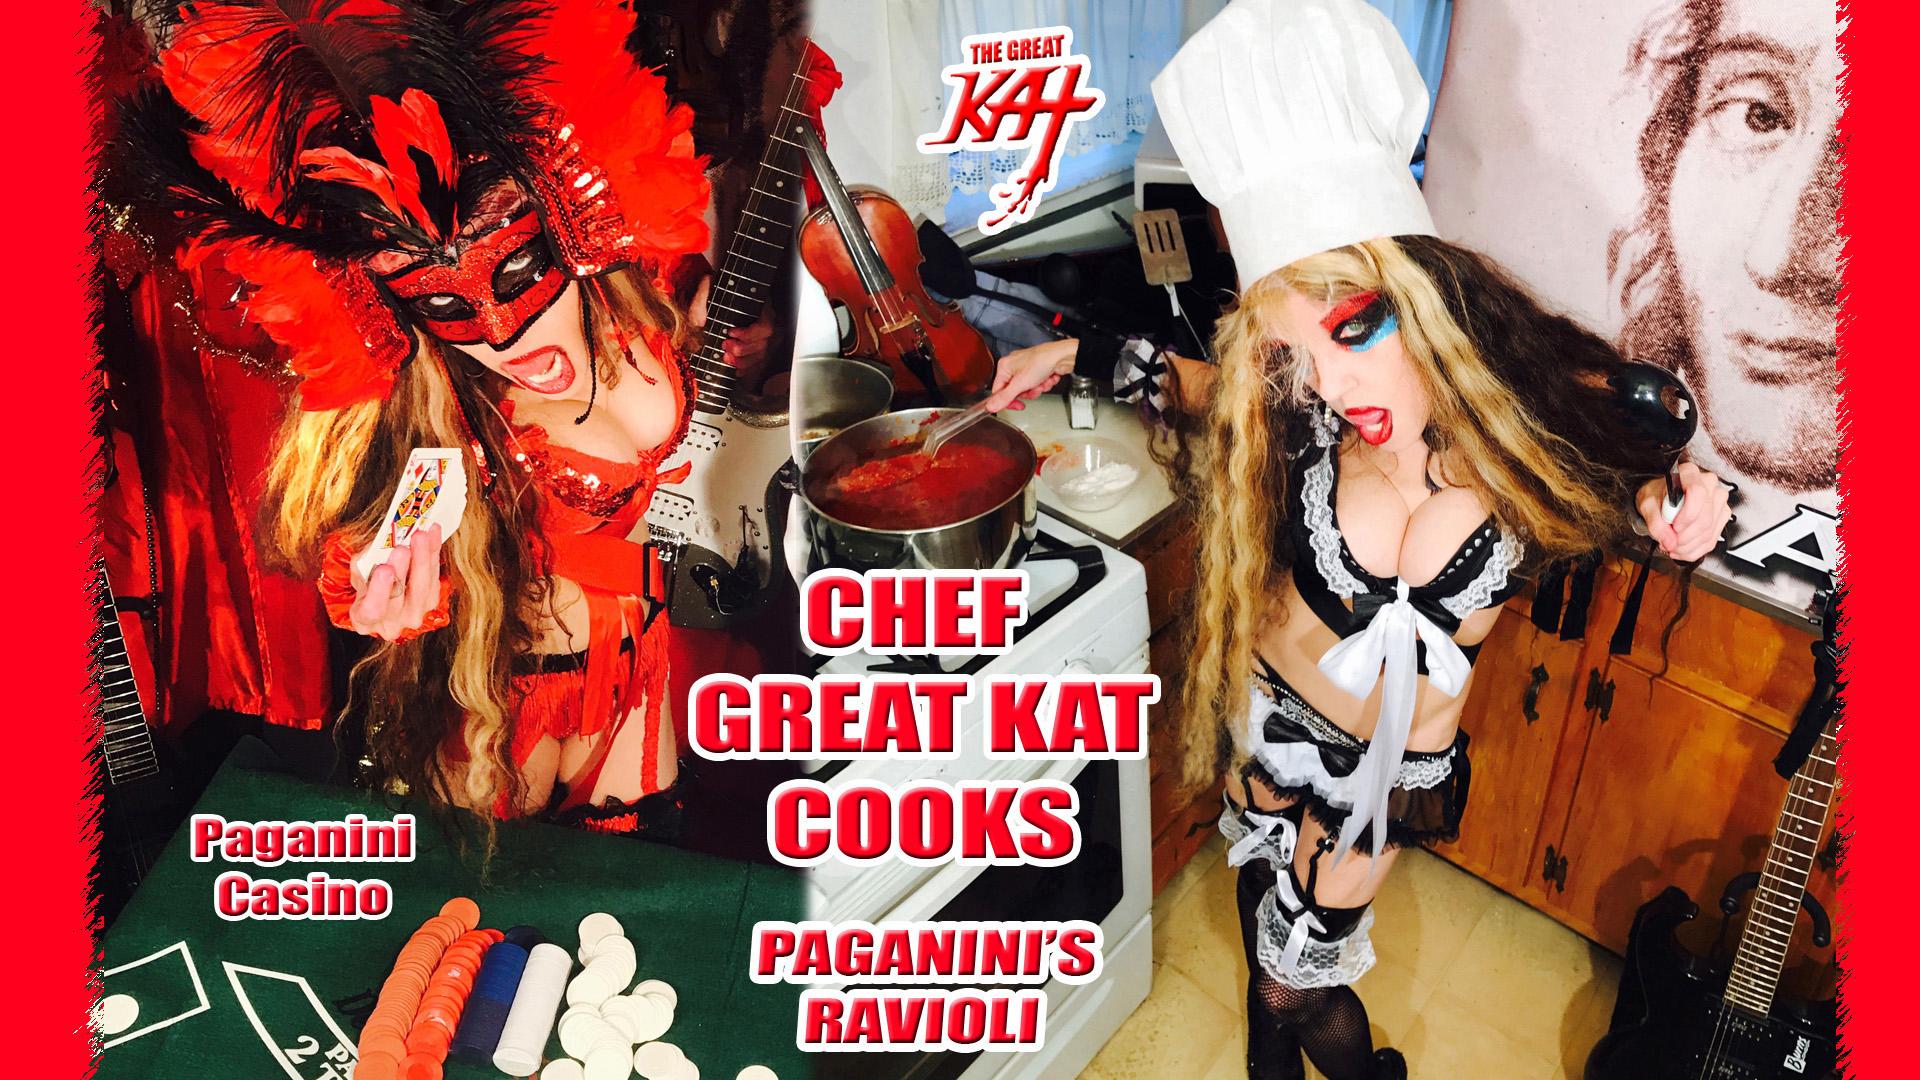 CHEF GREAT KAT COOKS PAGANINIS RAVIOLI! From CHEF GREAT KAT COOKS PAGANINI'S RAVIOLI!